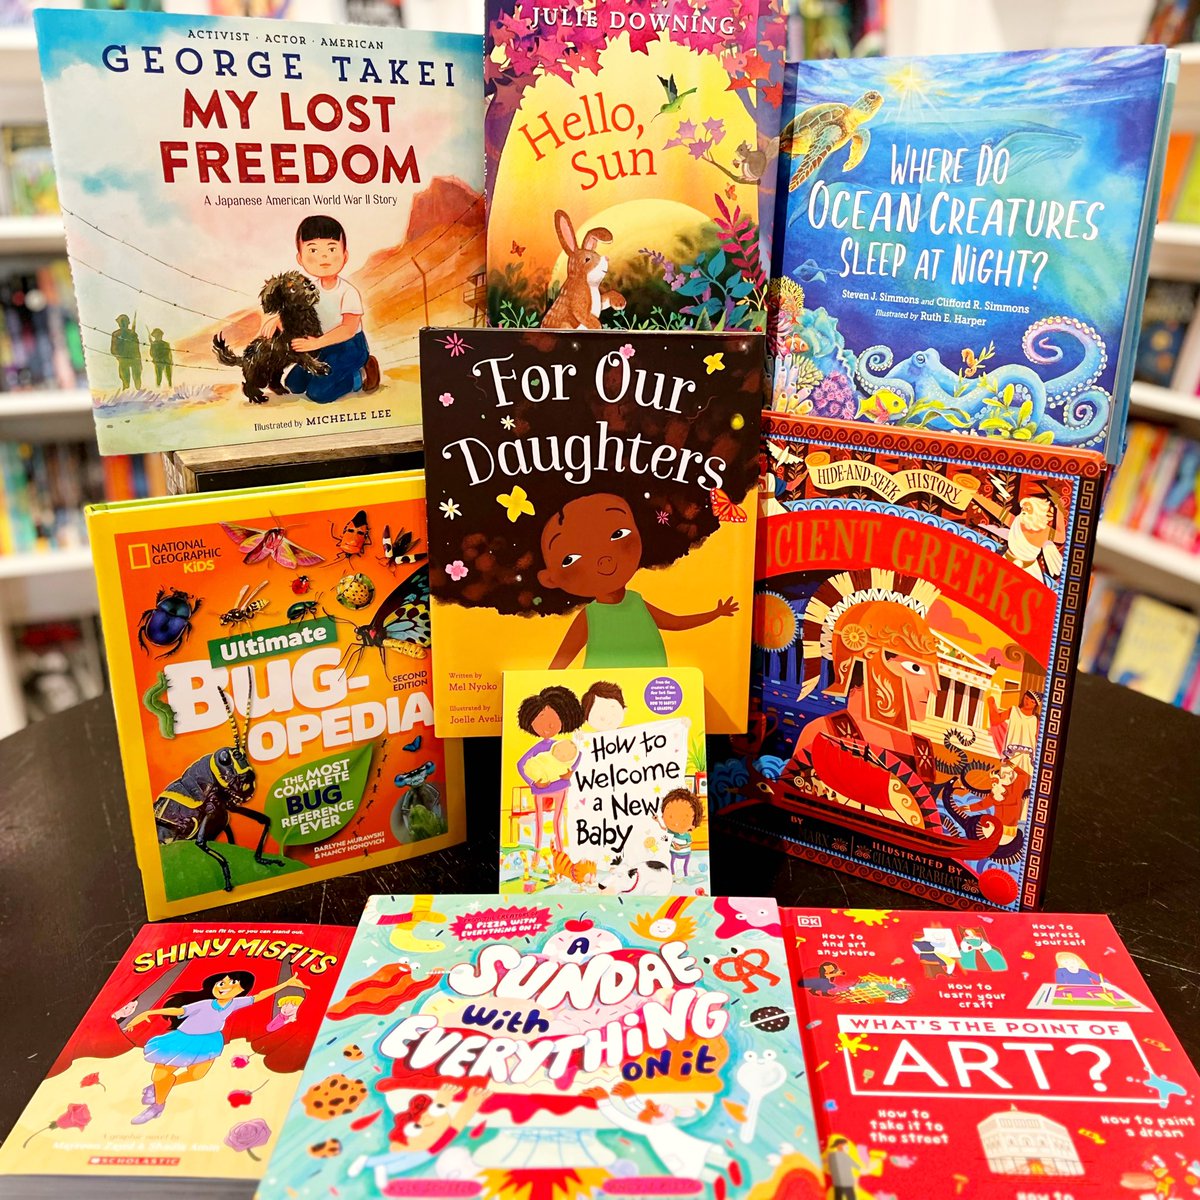 It’s a beautiful day for beautiful new books! Congrats to all who had a hand in their creation. Find these and so much more at our welcoming shop or online at covertocoverchildrensbooks.com/new-picks